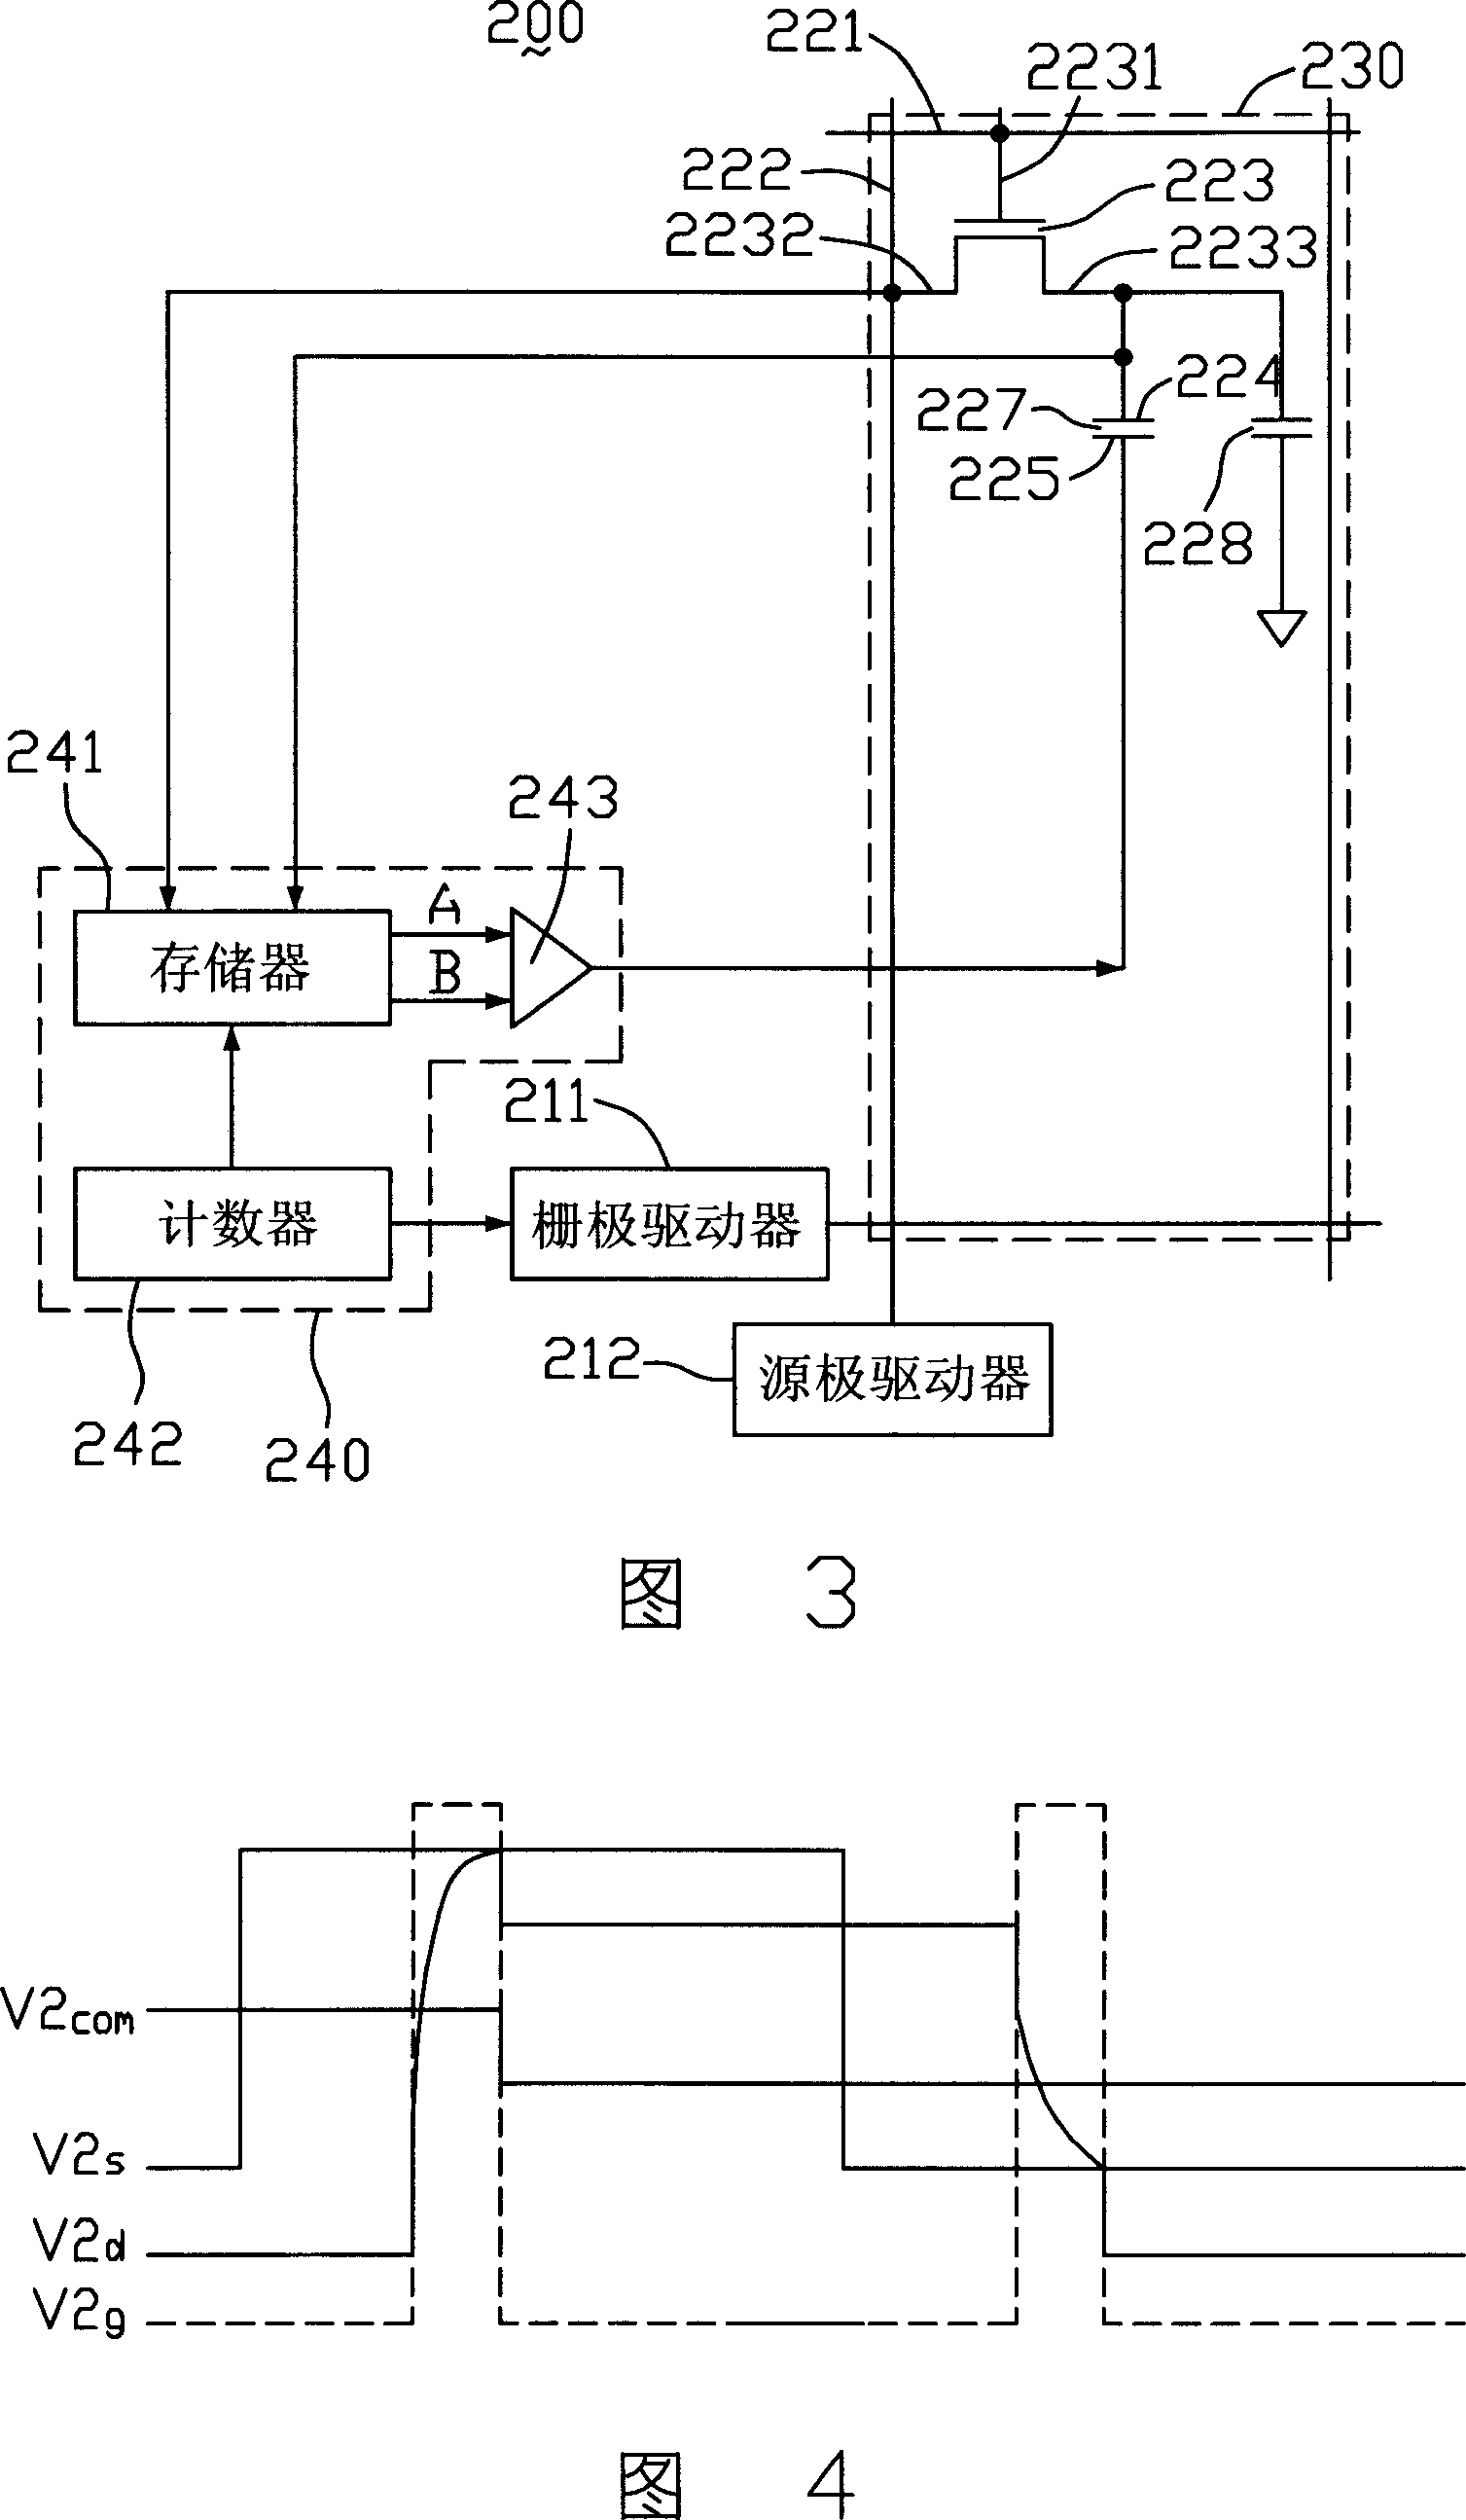 Liquid crystal display and its compensating feed through voltage method